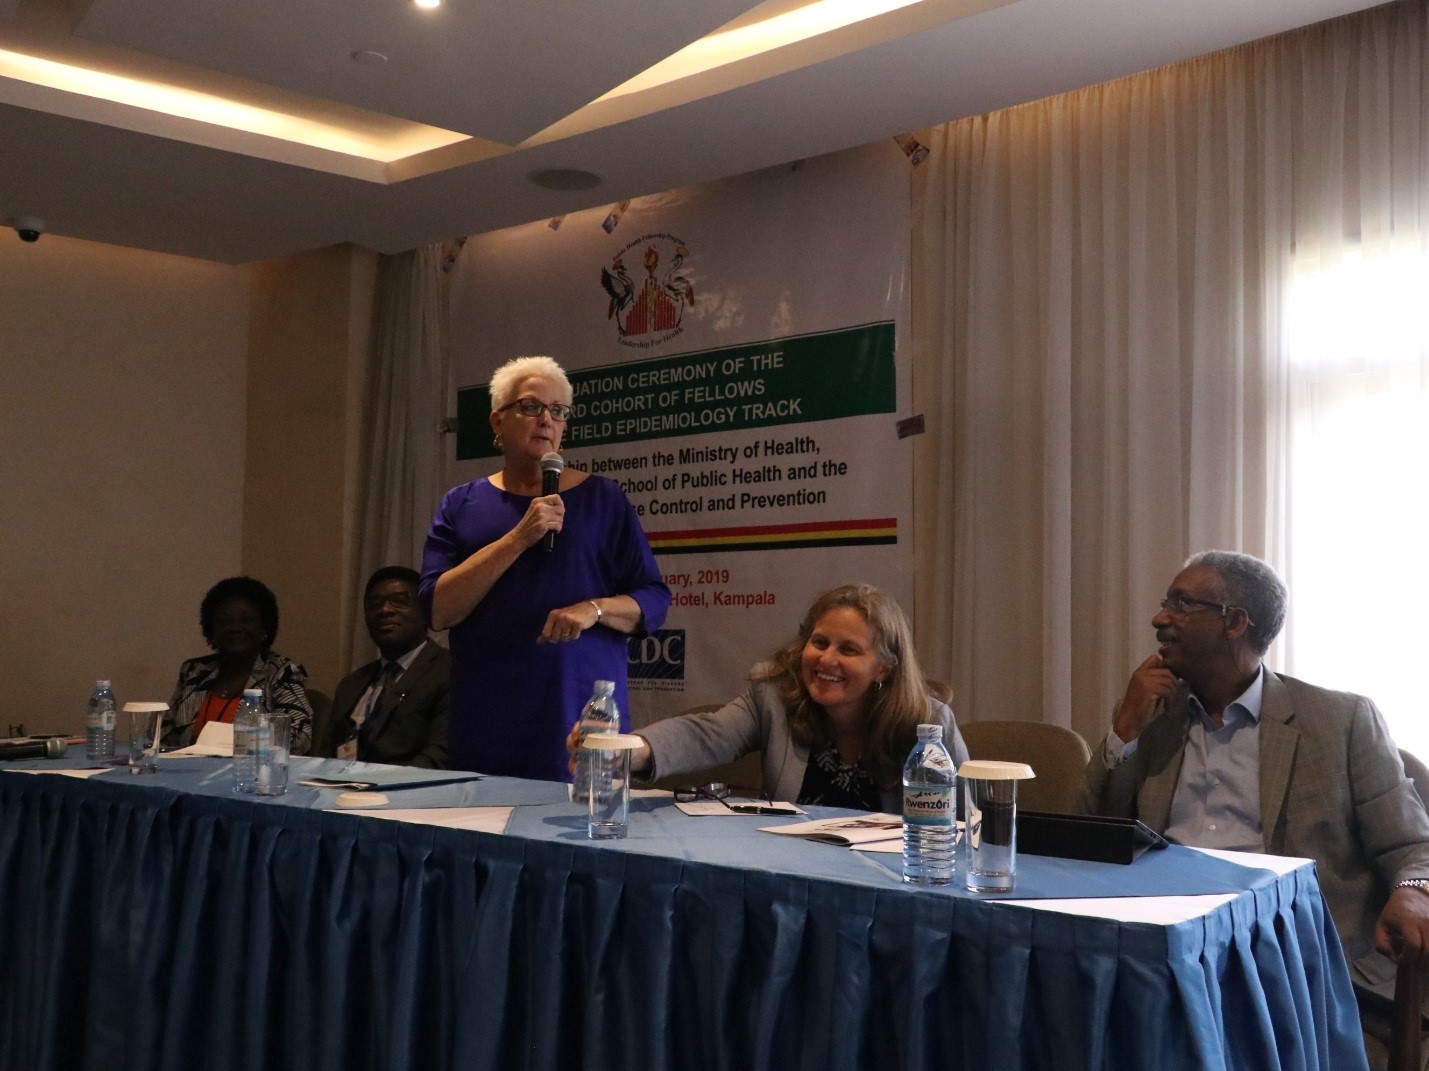 H.E Deborah Malac, speaking at the graduation ceremony of 11 students in public health